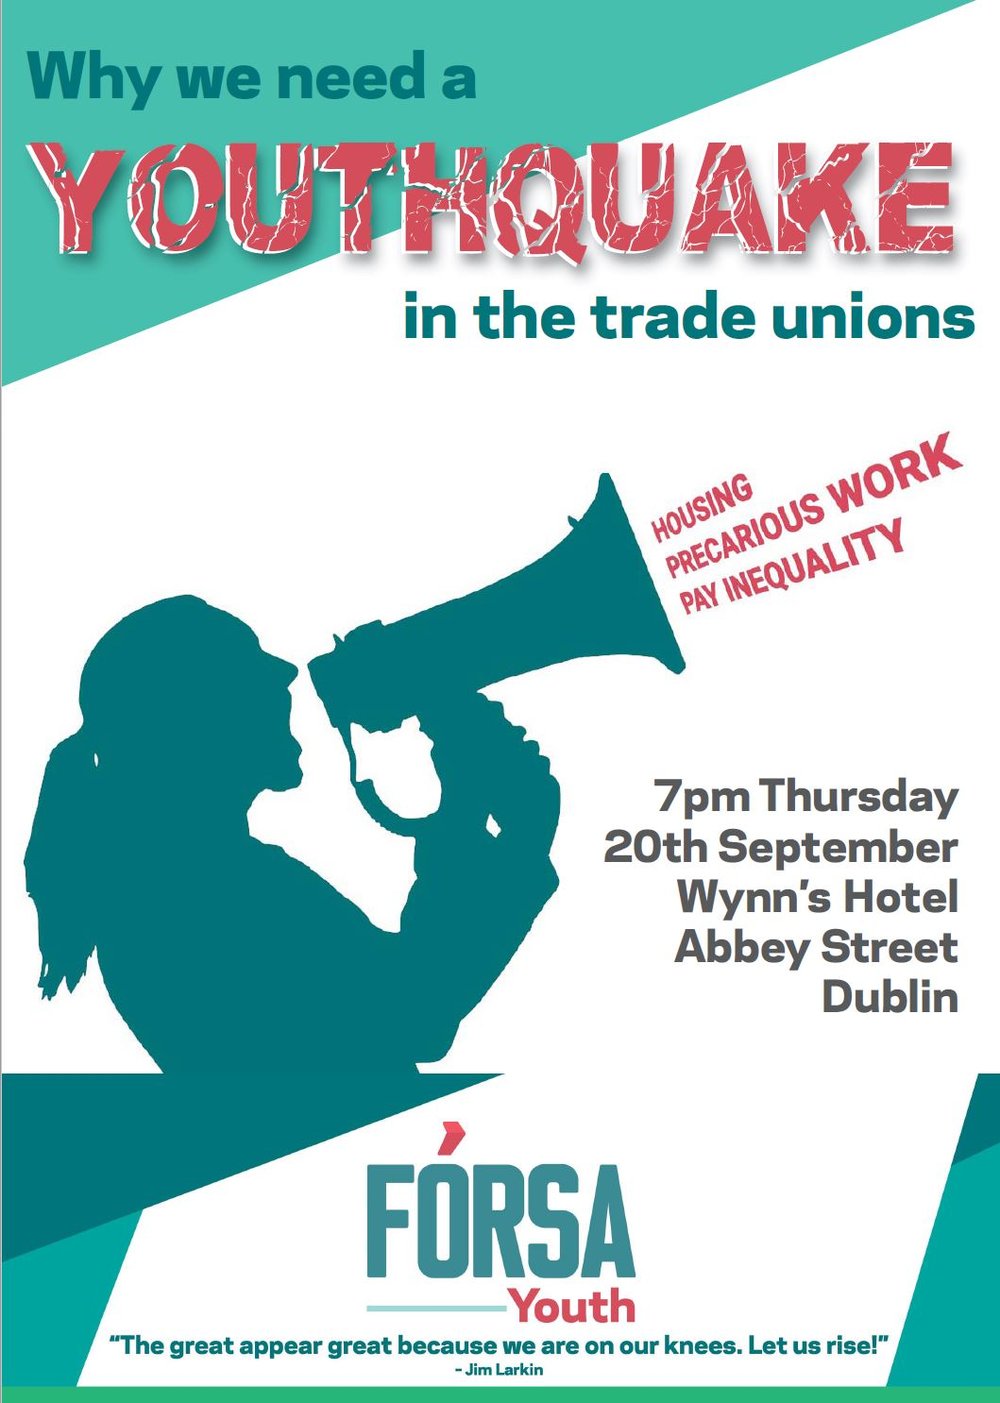 The event will include a variety of speakers to discuss issues pertinent to younger workers. Precarious work, pay inequality and the housing crises are just some of the topics up for discussion. 